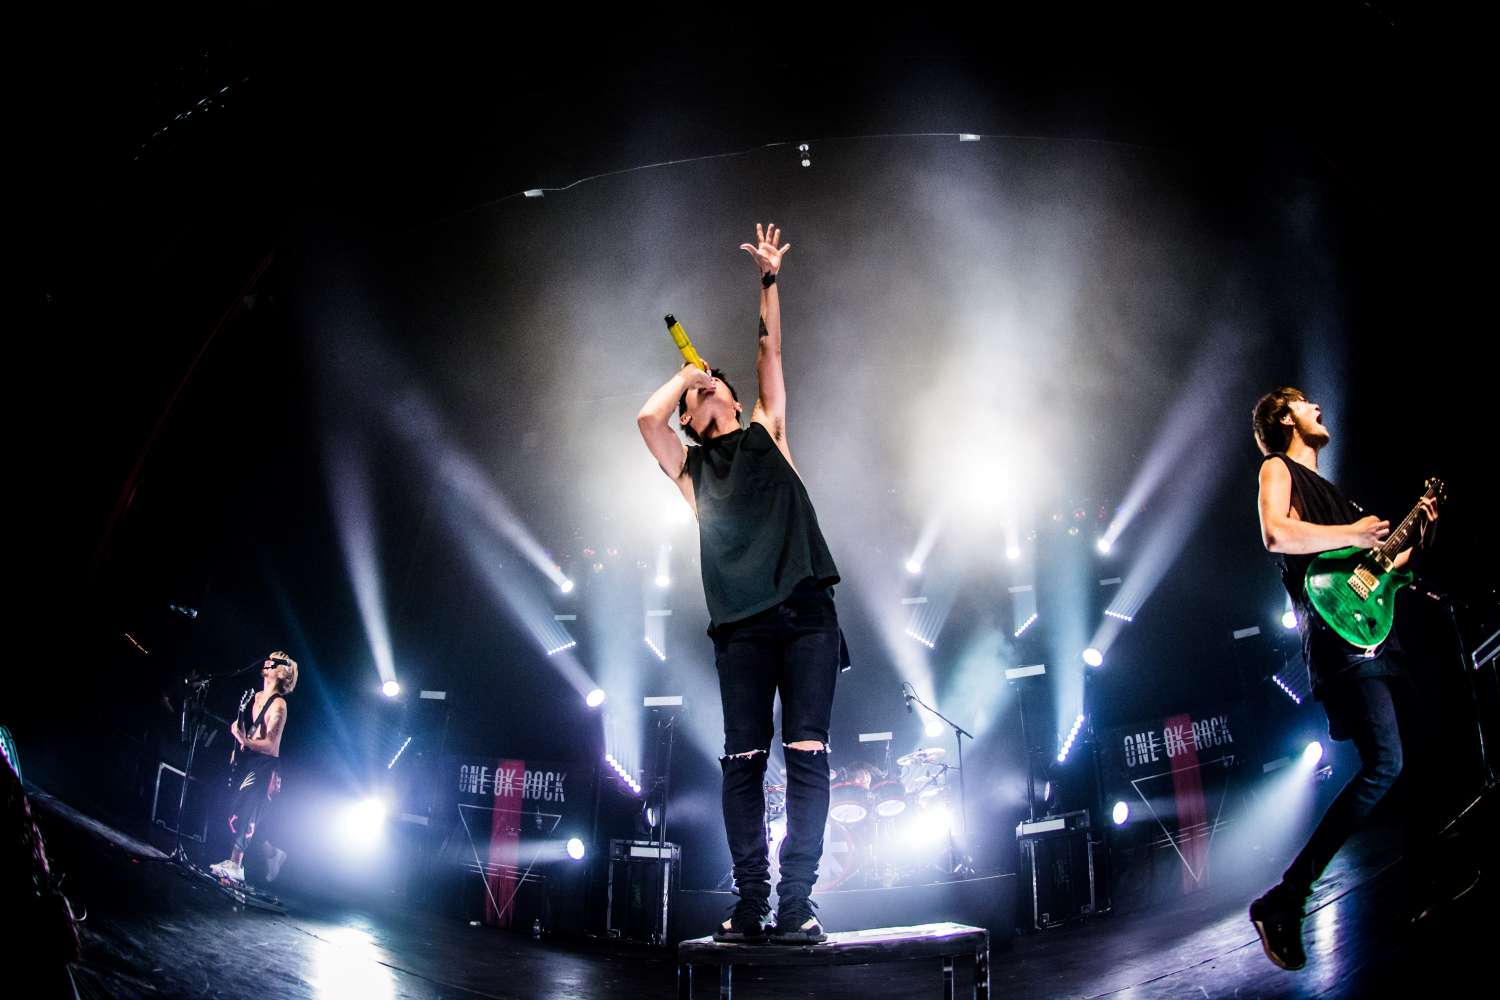 One OK Rock is currently touring in Japan